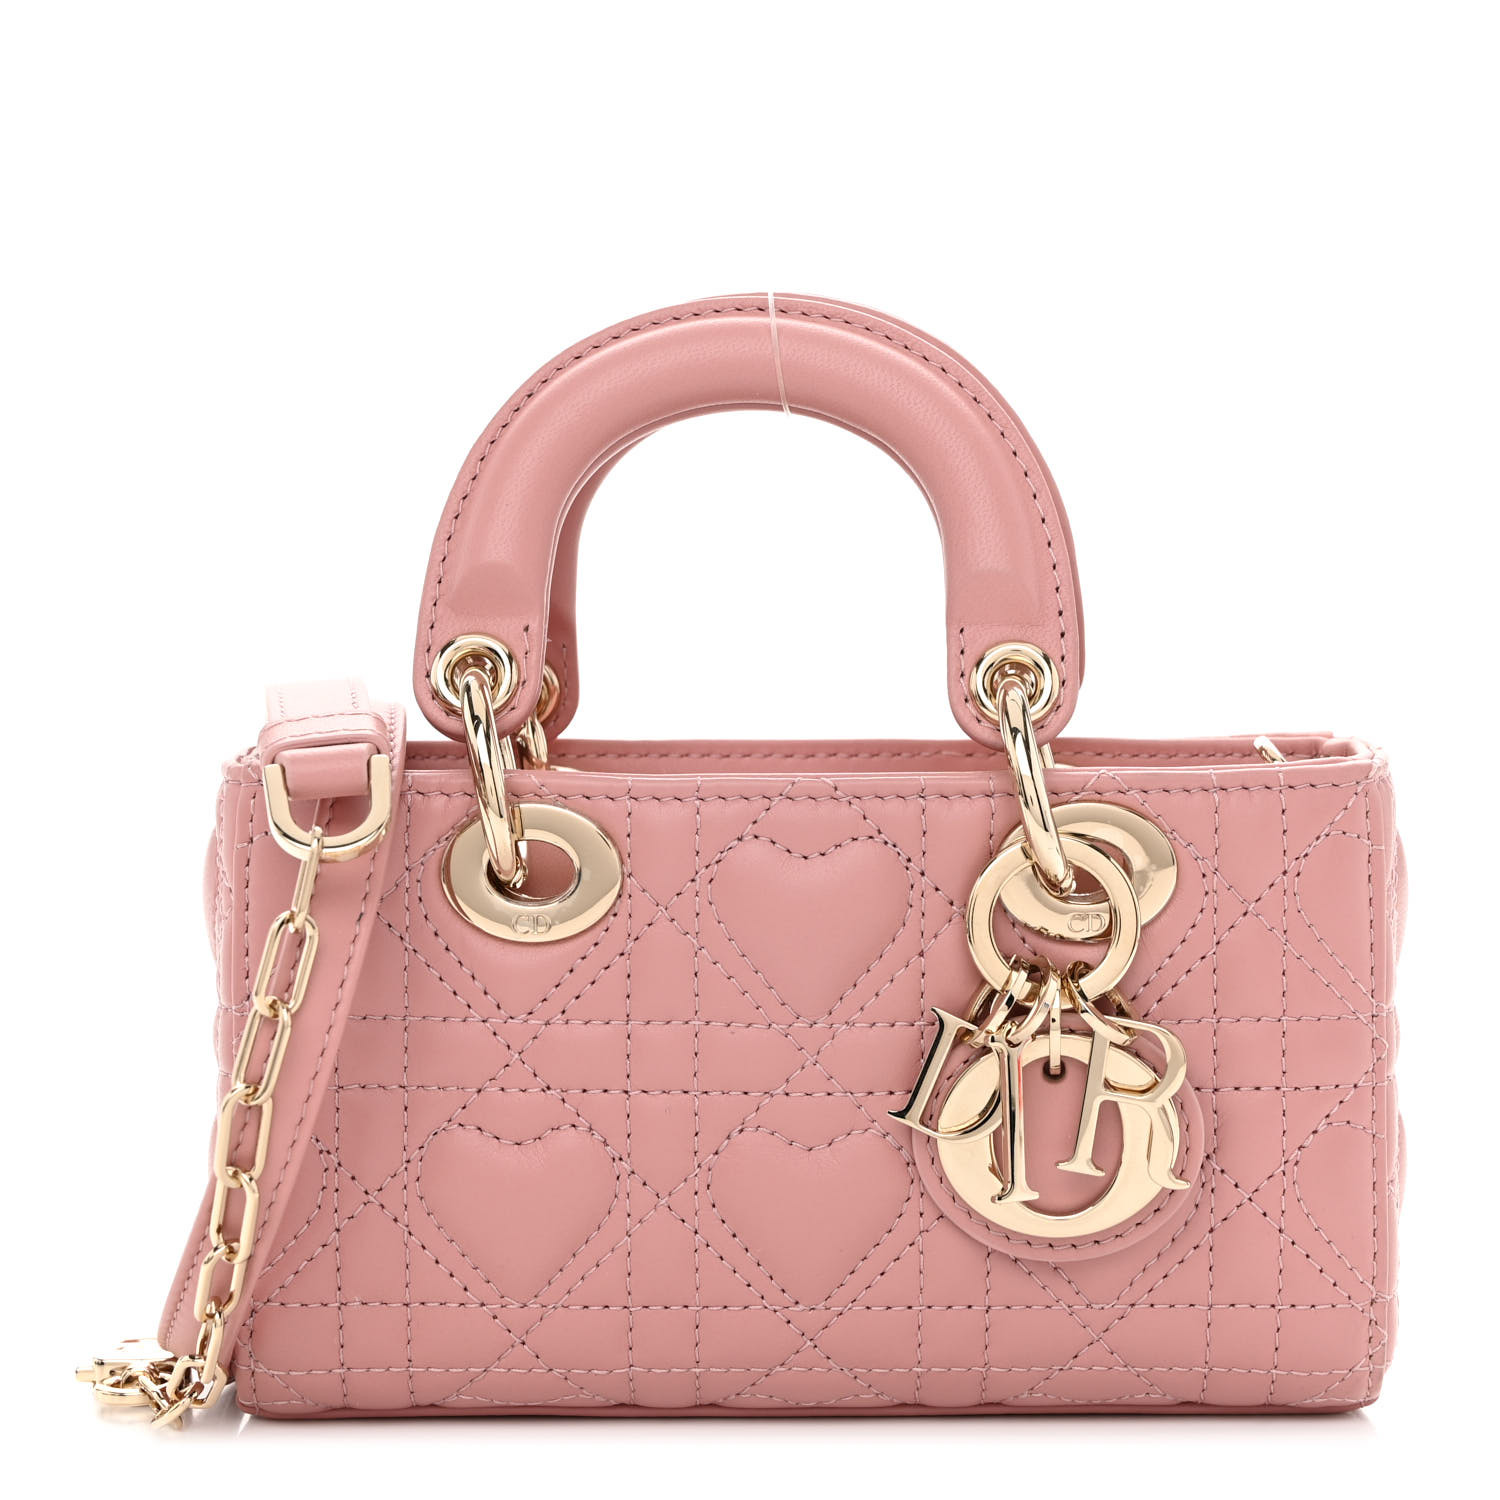 image of CHRISTIAN DIOR Lambskin Cannage Micro Lady D-Joy in the color Rose De Vents by FASHIONPHILE